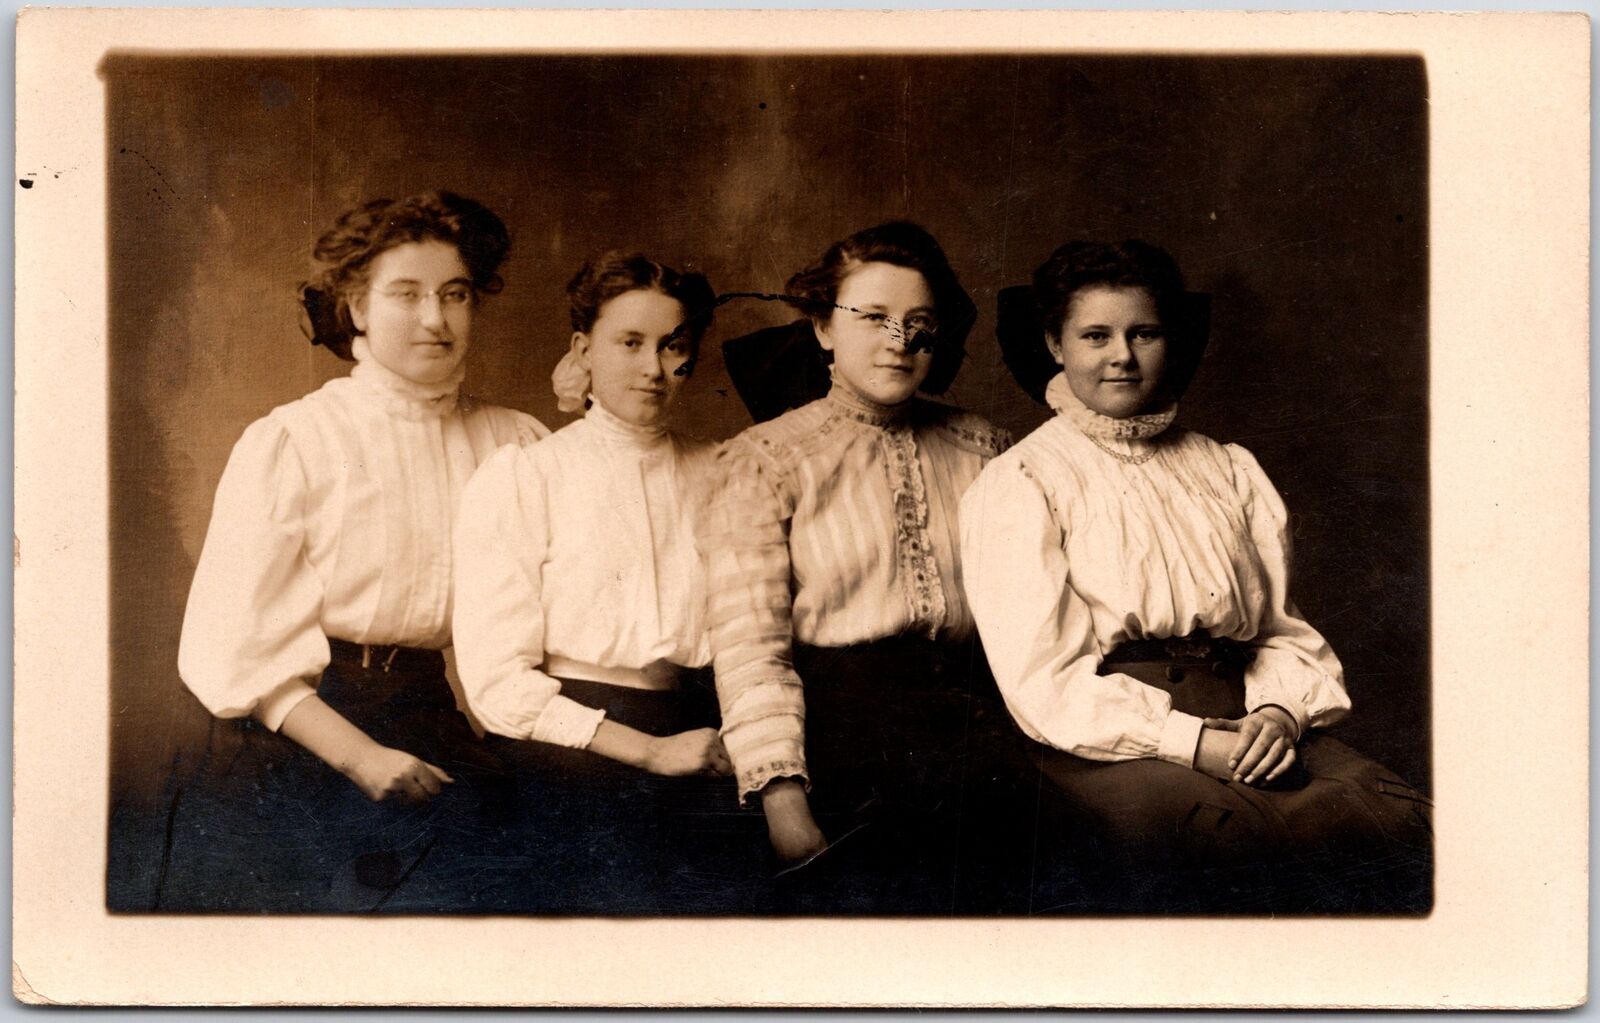 Four Sisters Wearing White Sleeves Well-Groomed Hair Real Photo RPPC Postcard